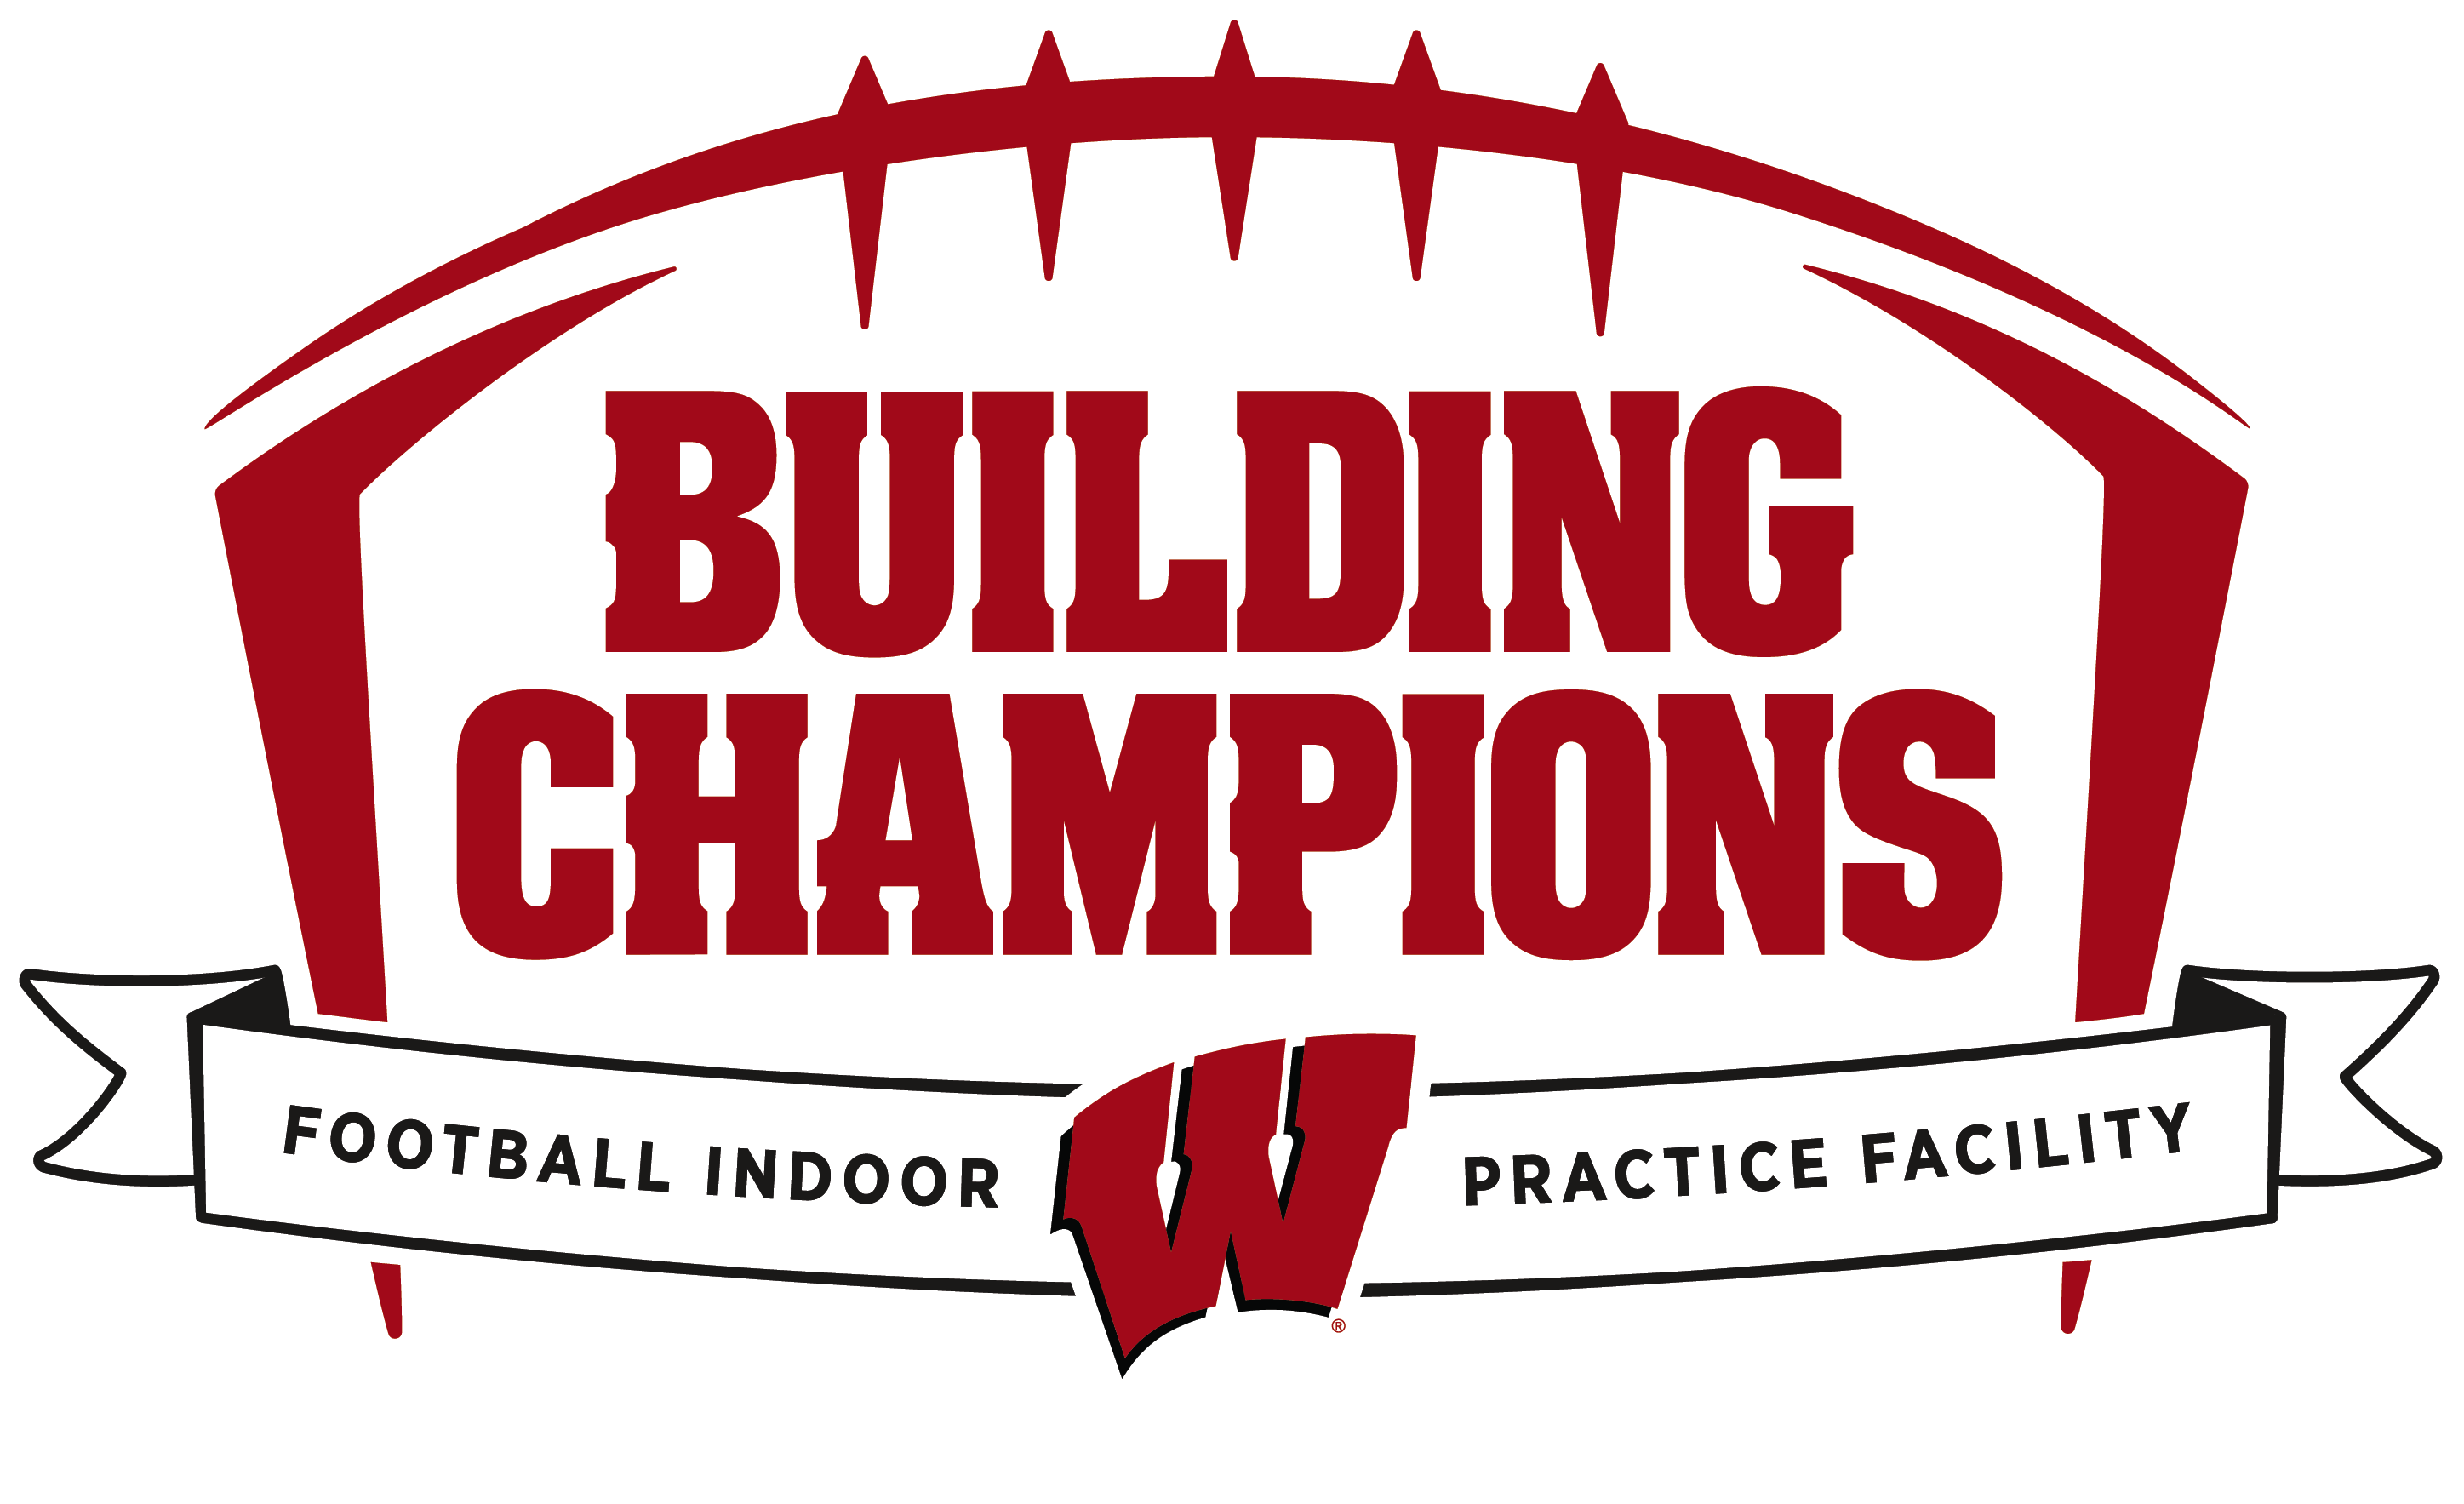 Building Champions: Football Indoor Practice Facility